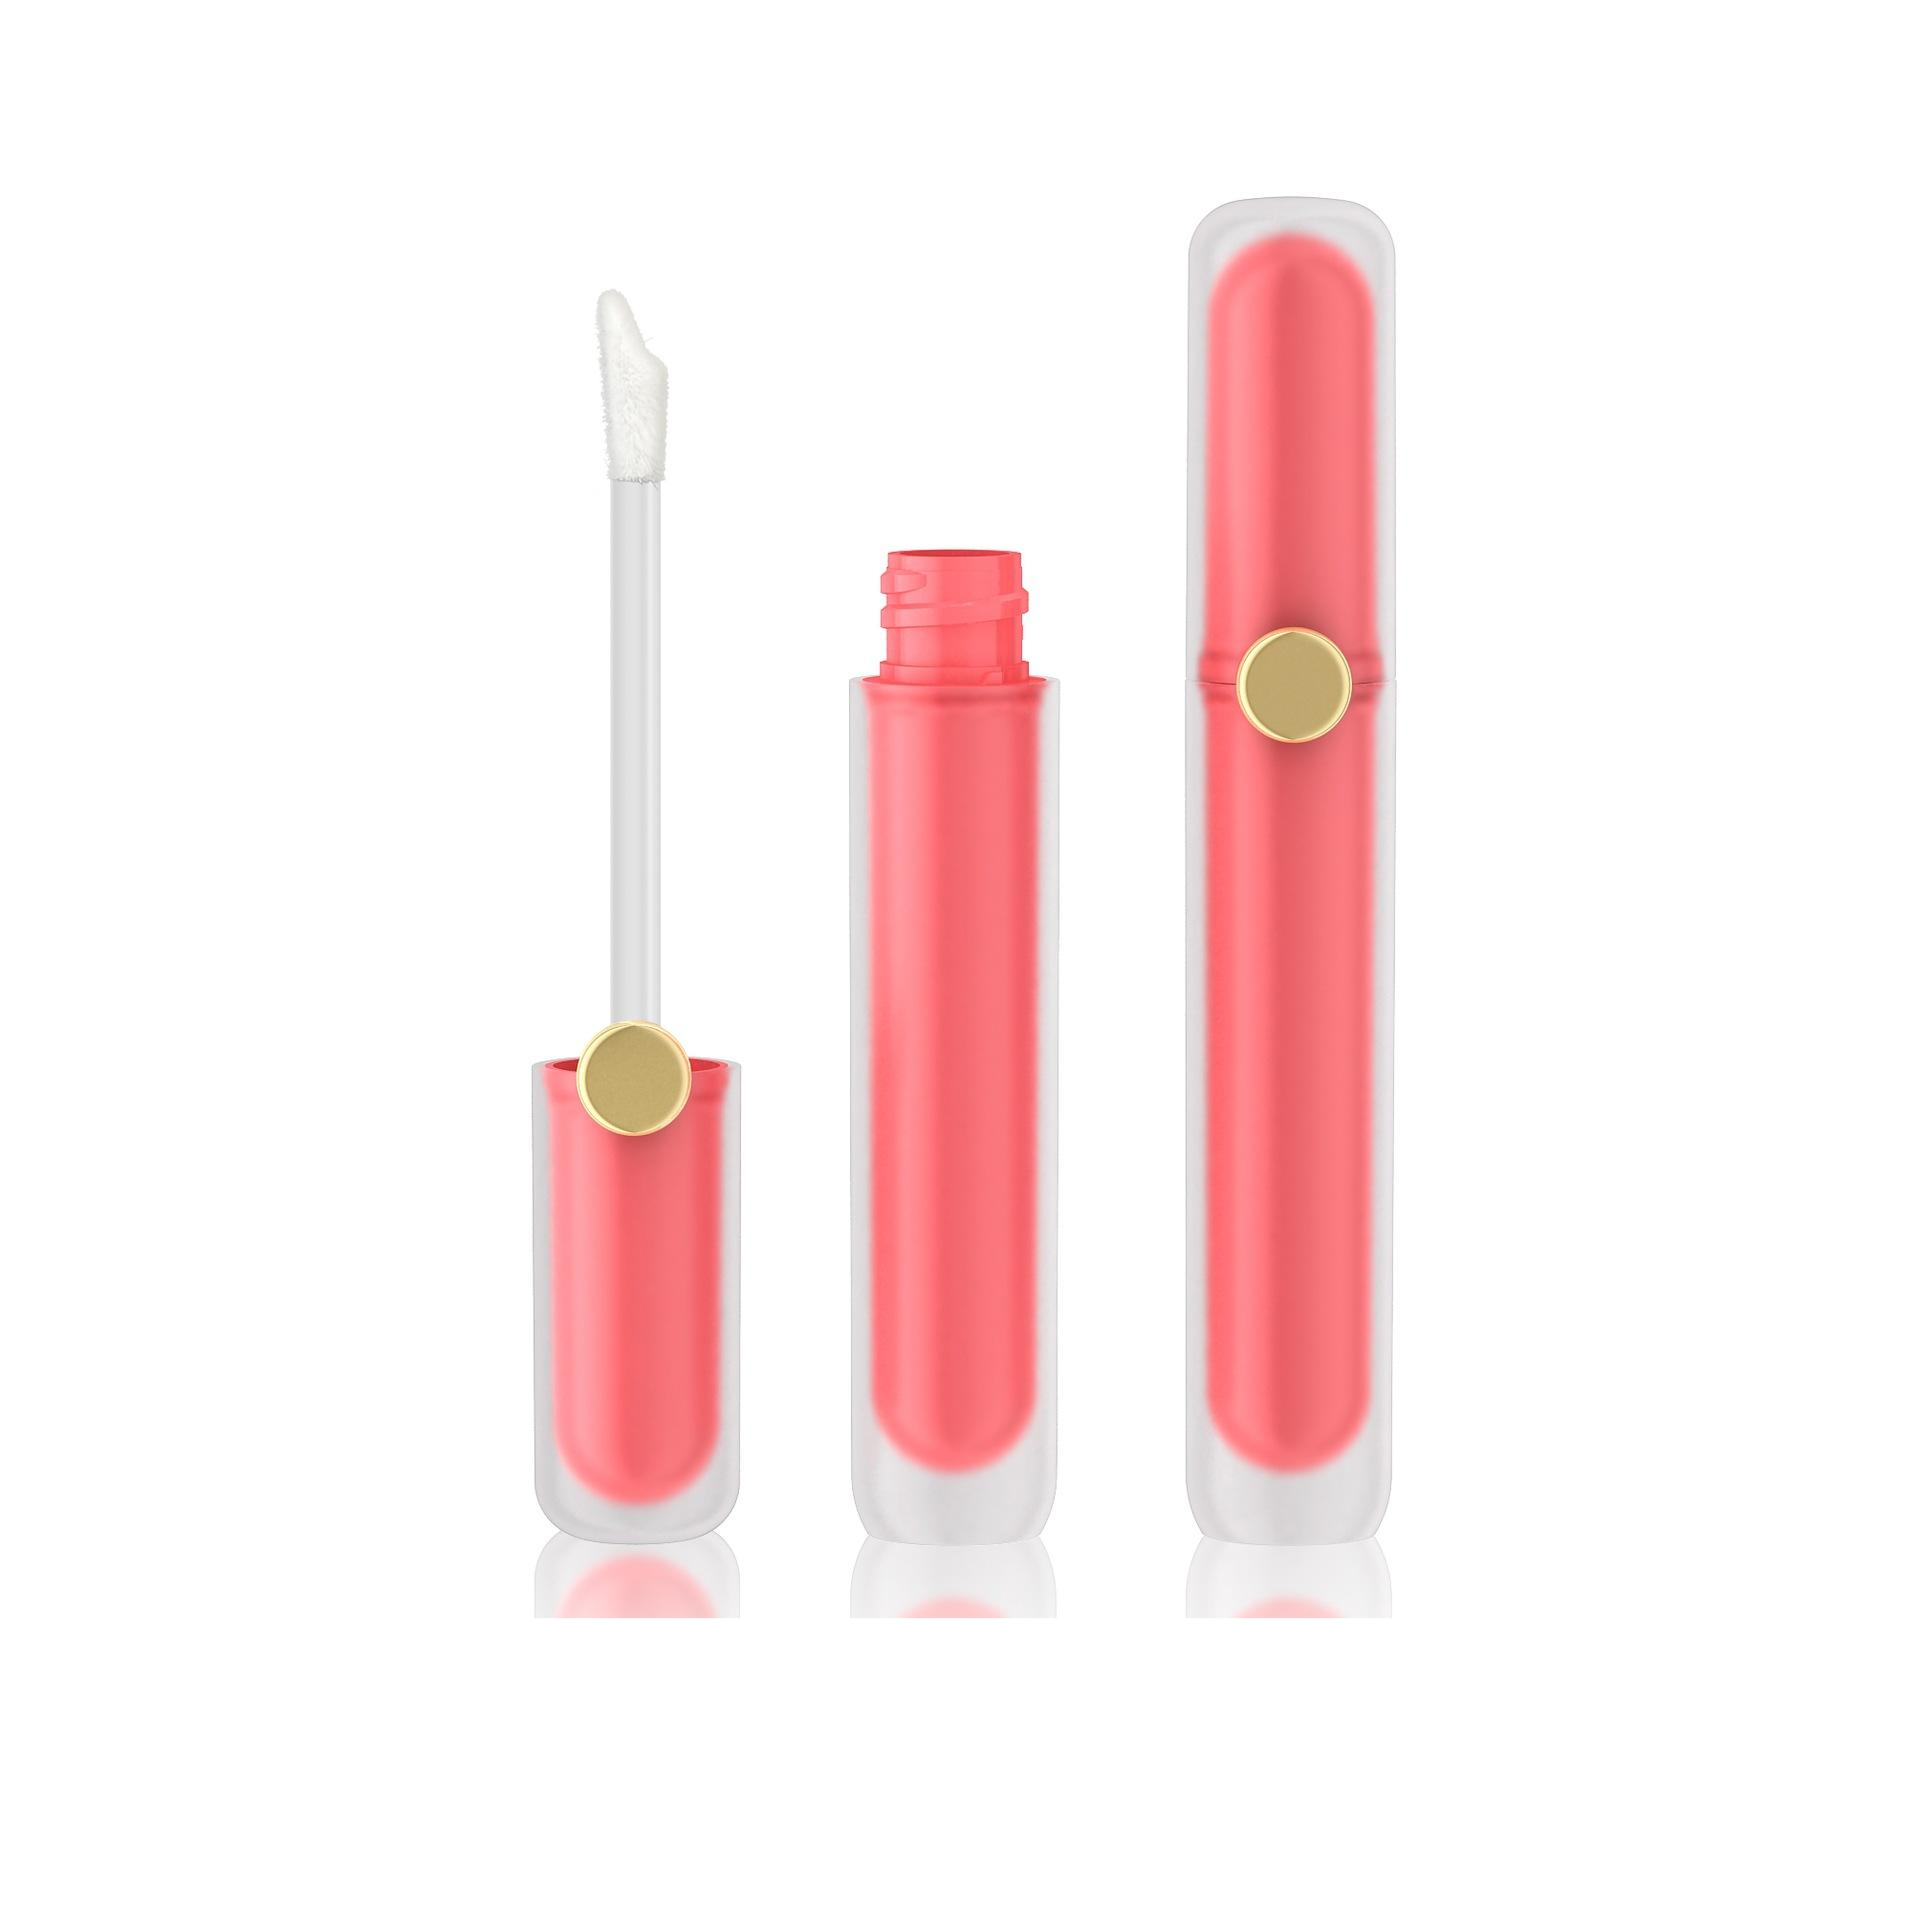 Best quality Big Applicator Lip Gloss Tube - 6ml unique cute  Lipgloss Tube empty Lip Gloss Containers transparent liquid lipstick oval bottle  with brush tip applicator – EUGENG